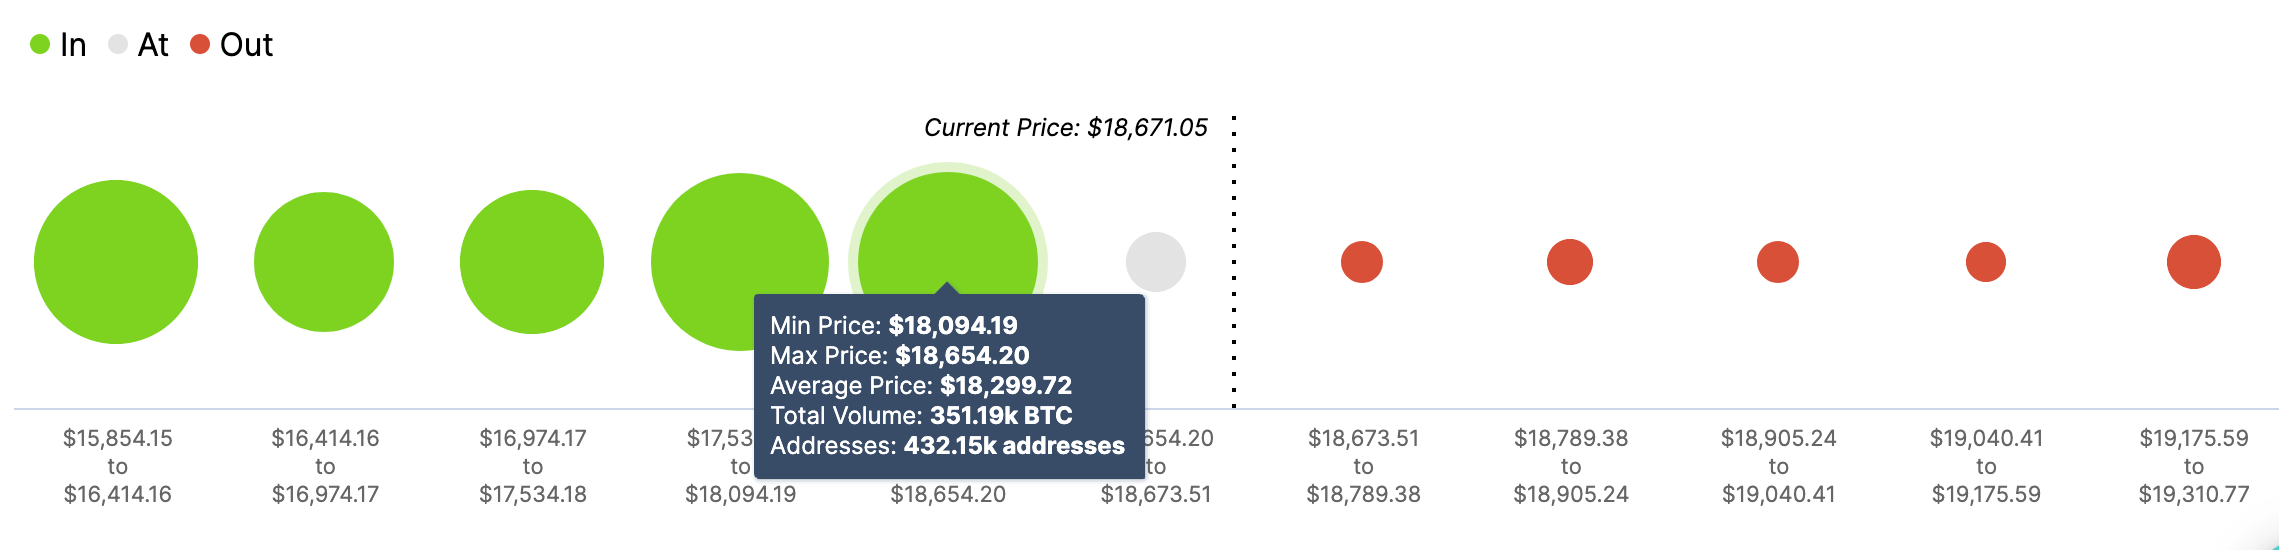 Bitcoin In/Out of the Money Around Price